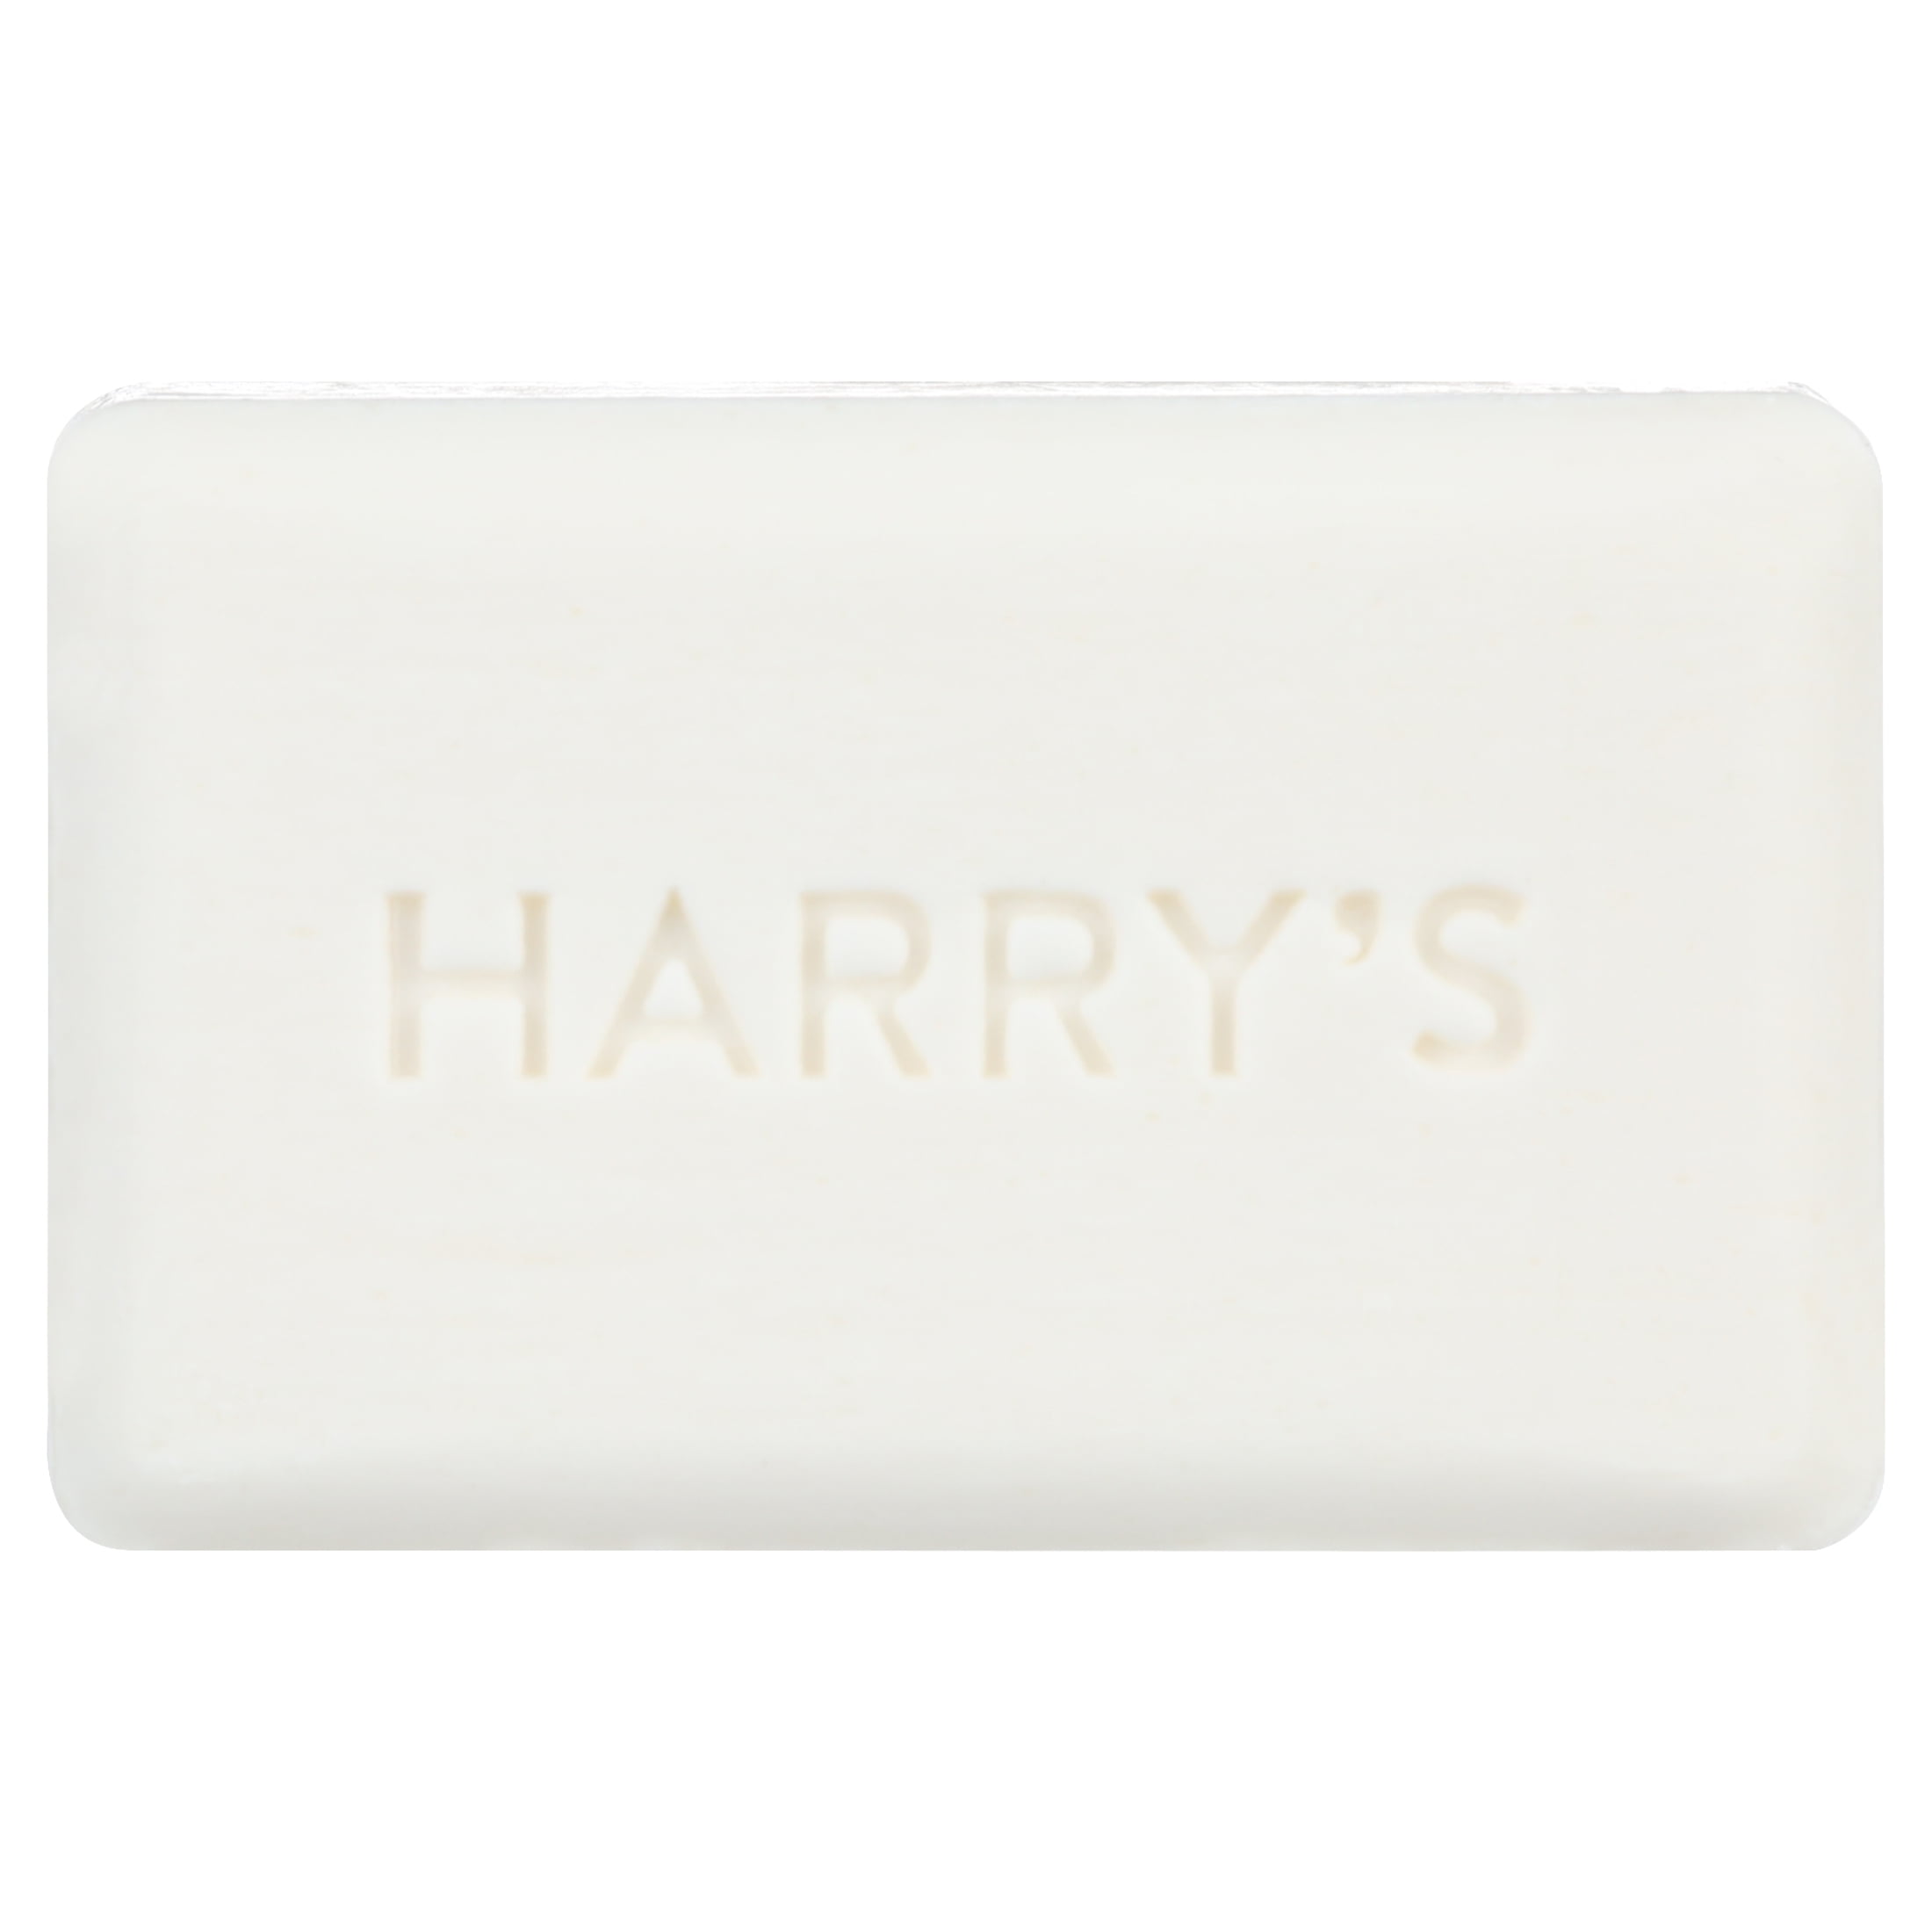 Harry's Bar Soap for Men, Shiso Scent of Bright Herbs, 4 Pack